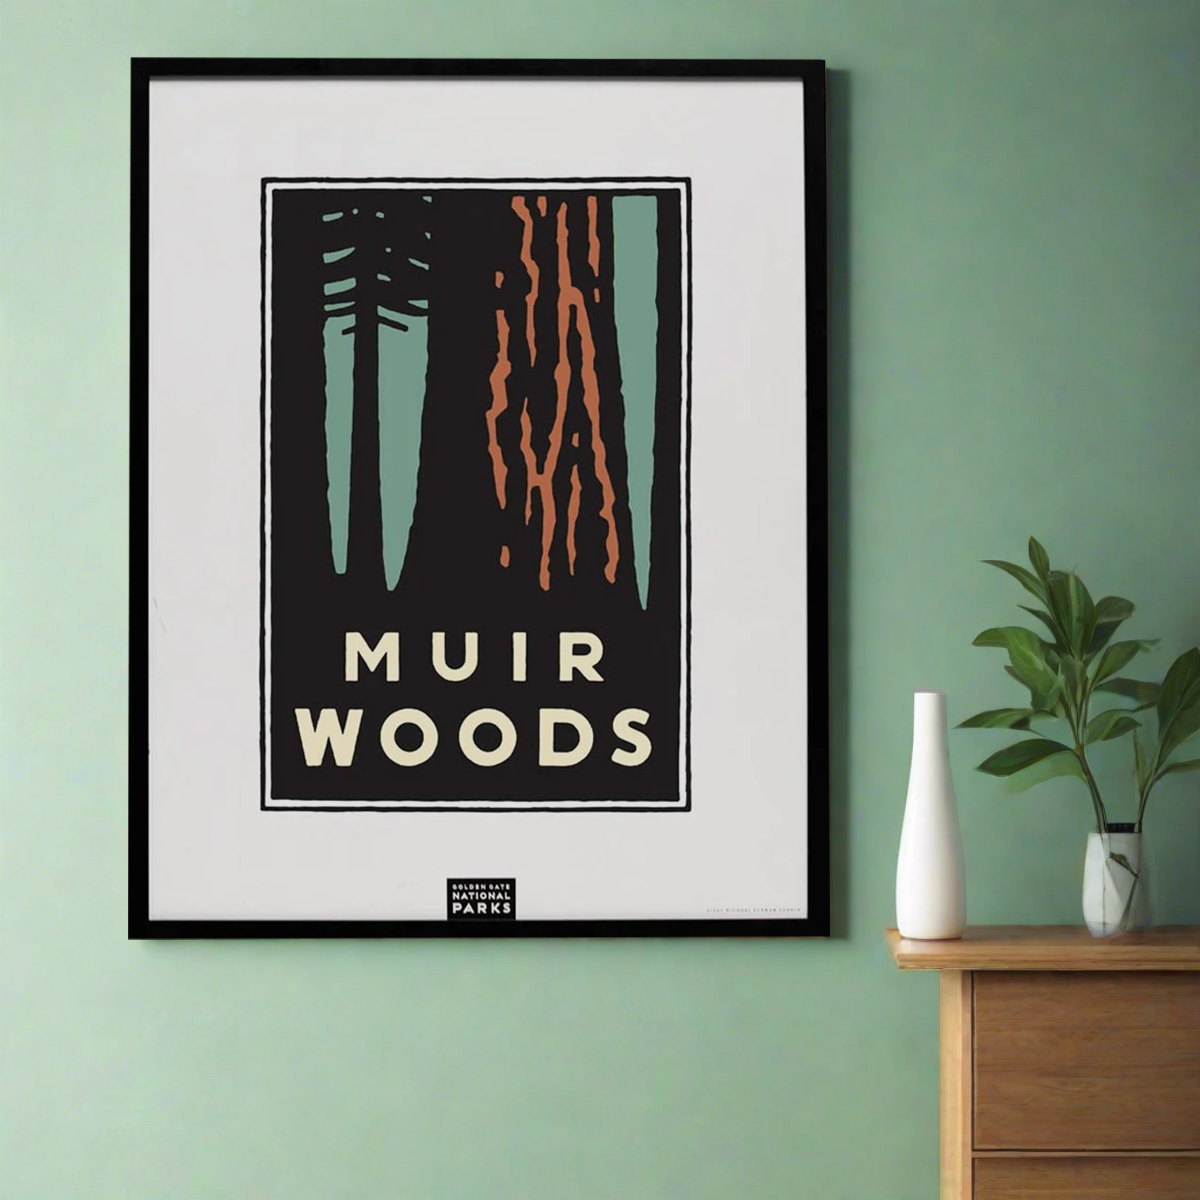 Framed Muir Woods poster with art by Michael Schwab